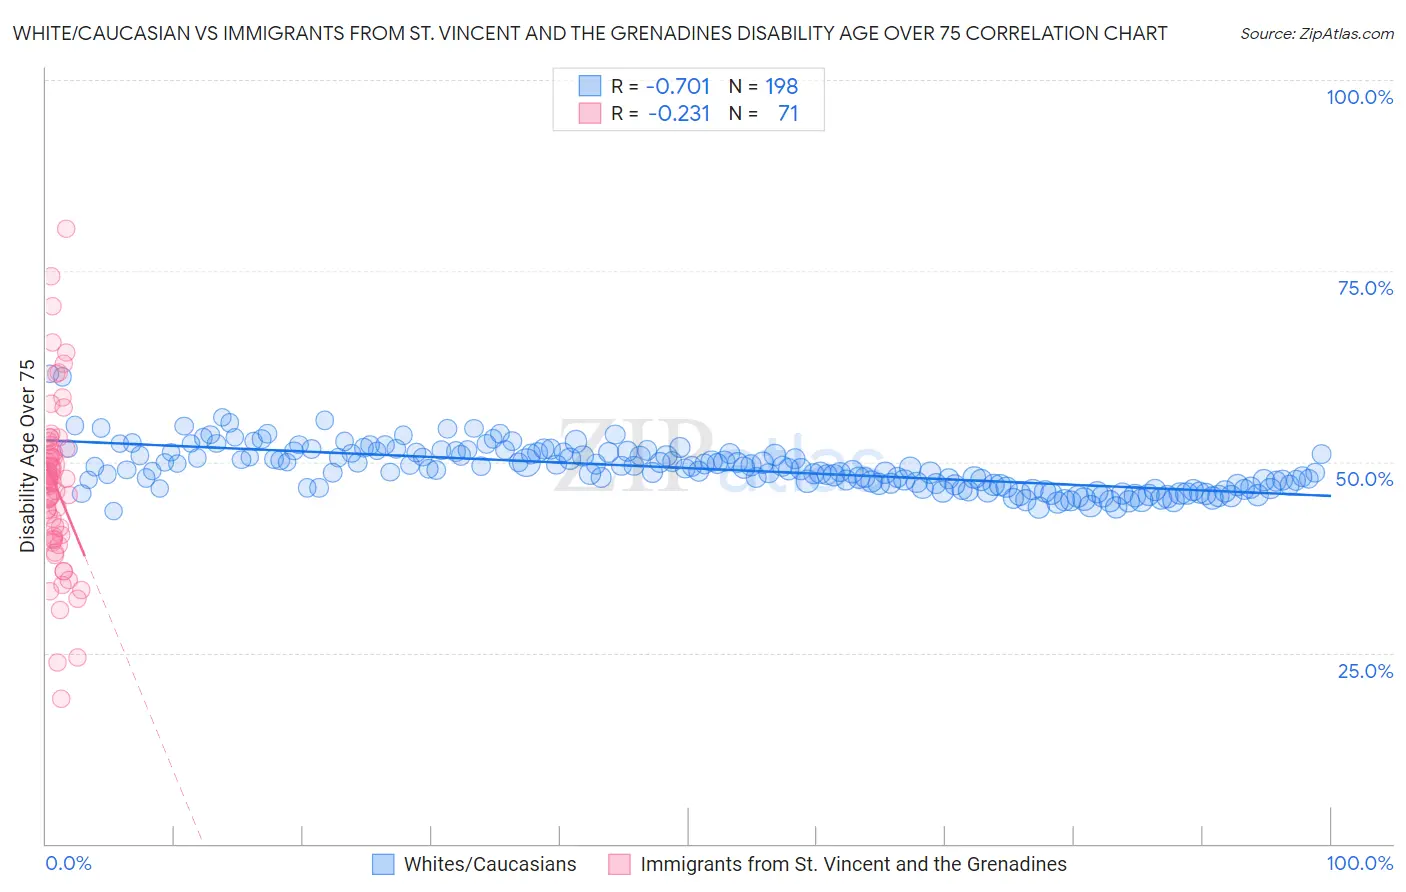 White/Caucasian vs Immigrants from St. Vincent and the Grenadines Disability Age Over 75